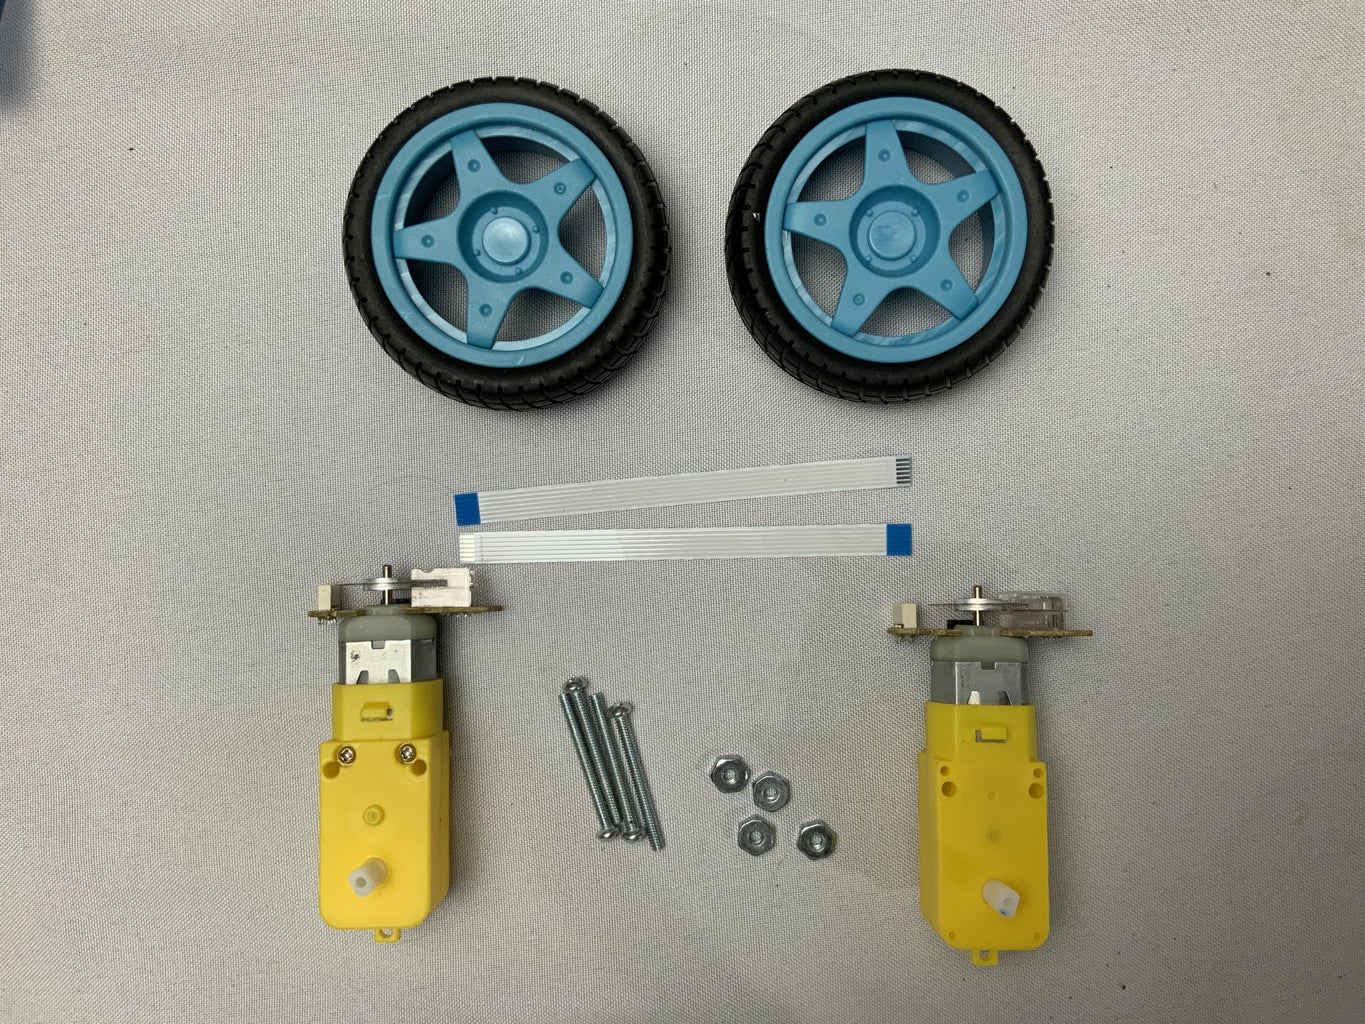 INSTALLATION OF MOTORS AND WHEELS